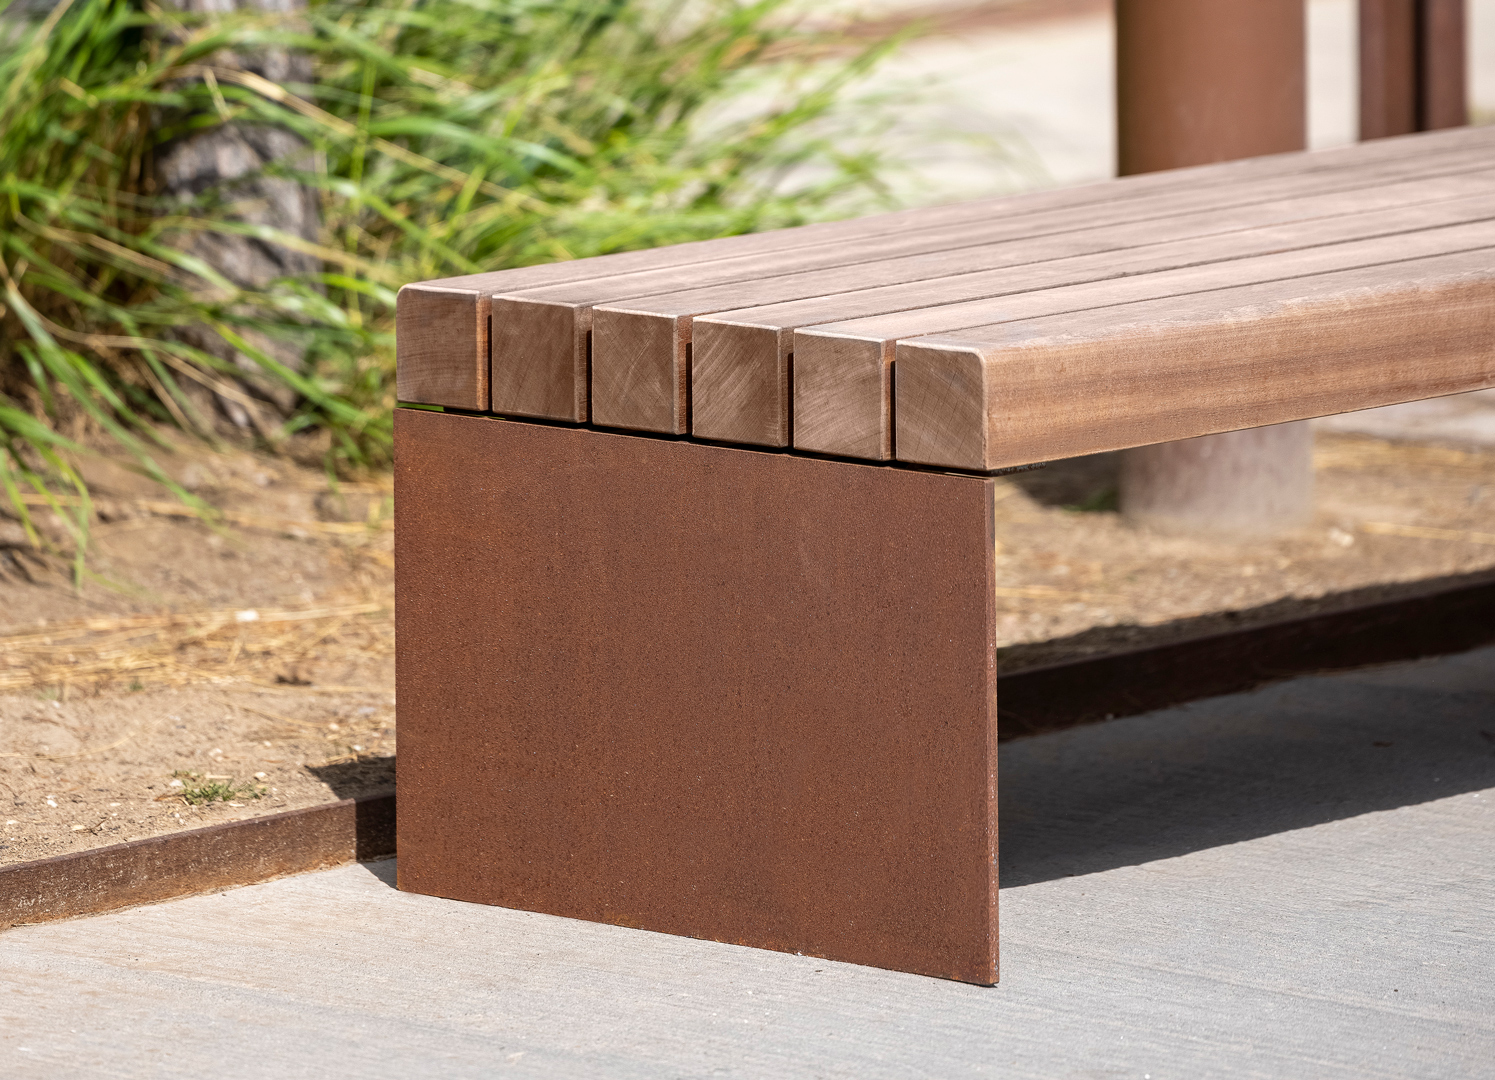 COSI bench with mahogany slats and corten steel ends is seen up close